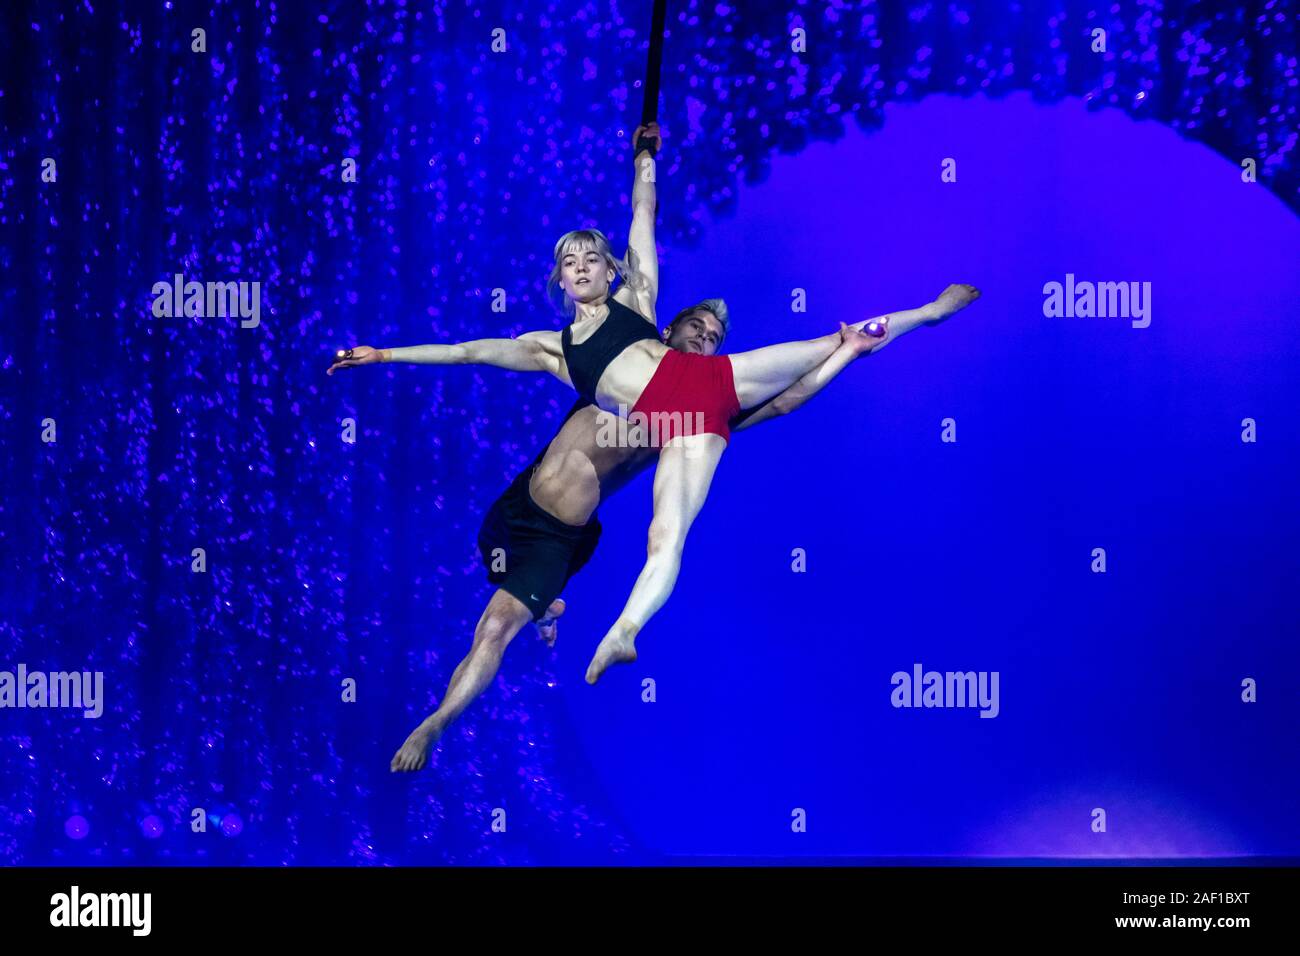 New York, USA,  11 December 2019.  Cirque du Soleil's Guillaume Paquin and Nicole Faubert perform the Aerial Duo Straps during the a rehearsal before tomorrow's opening for 'Twas the Night Before...  Cirque du Soleil's first ever Christmas show will debut at the Hulu Theater in Madison Square Garden on December 12, 2019. Credit: Enrique Shore/Alamy Live News Stock Photo